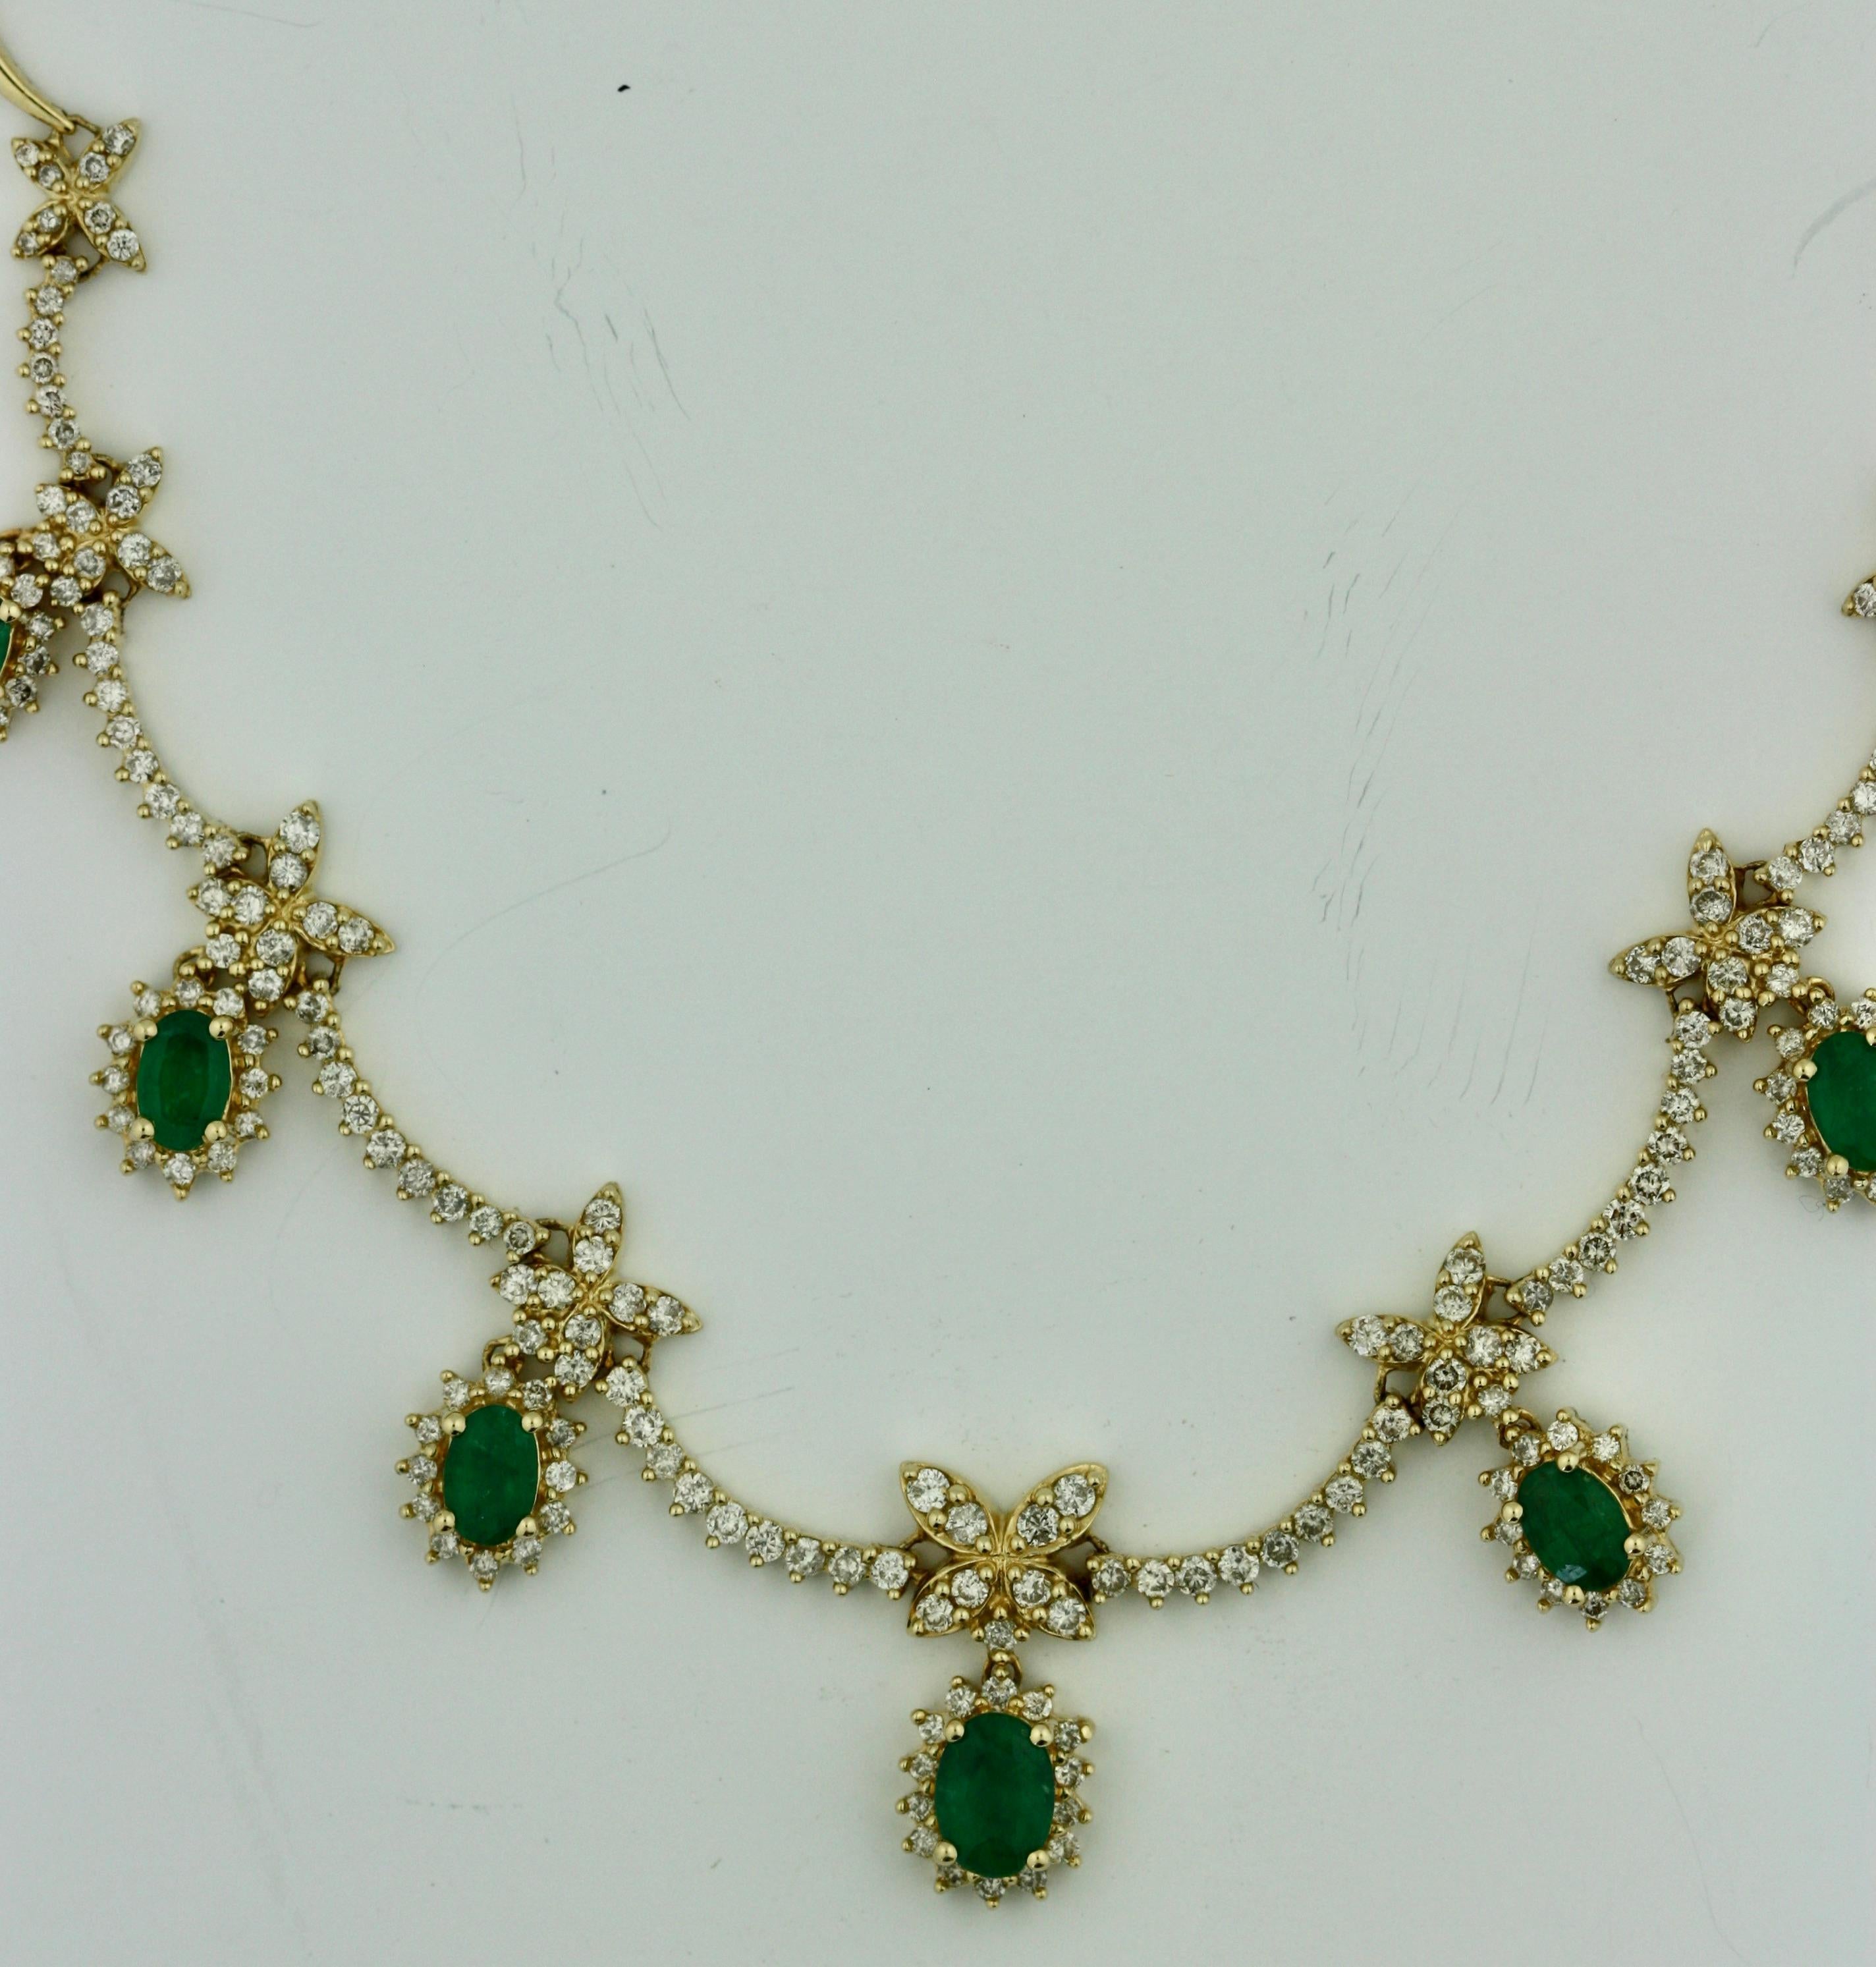 Emerald Cut Emerald and Diamond Necklace Mounted in 14 Karat Gold